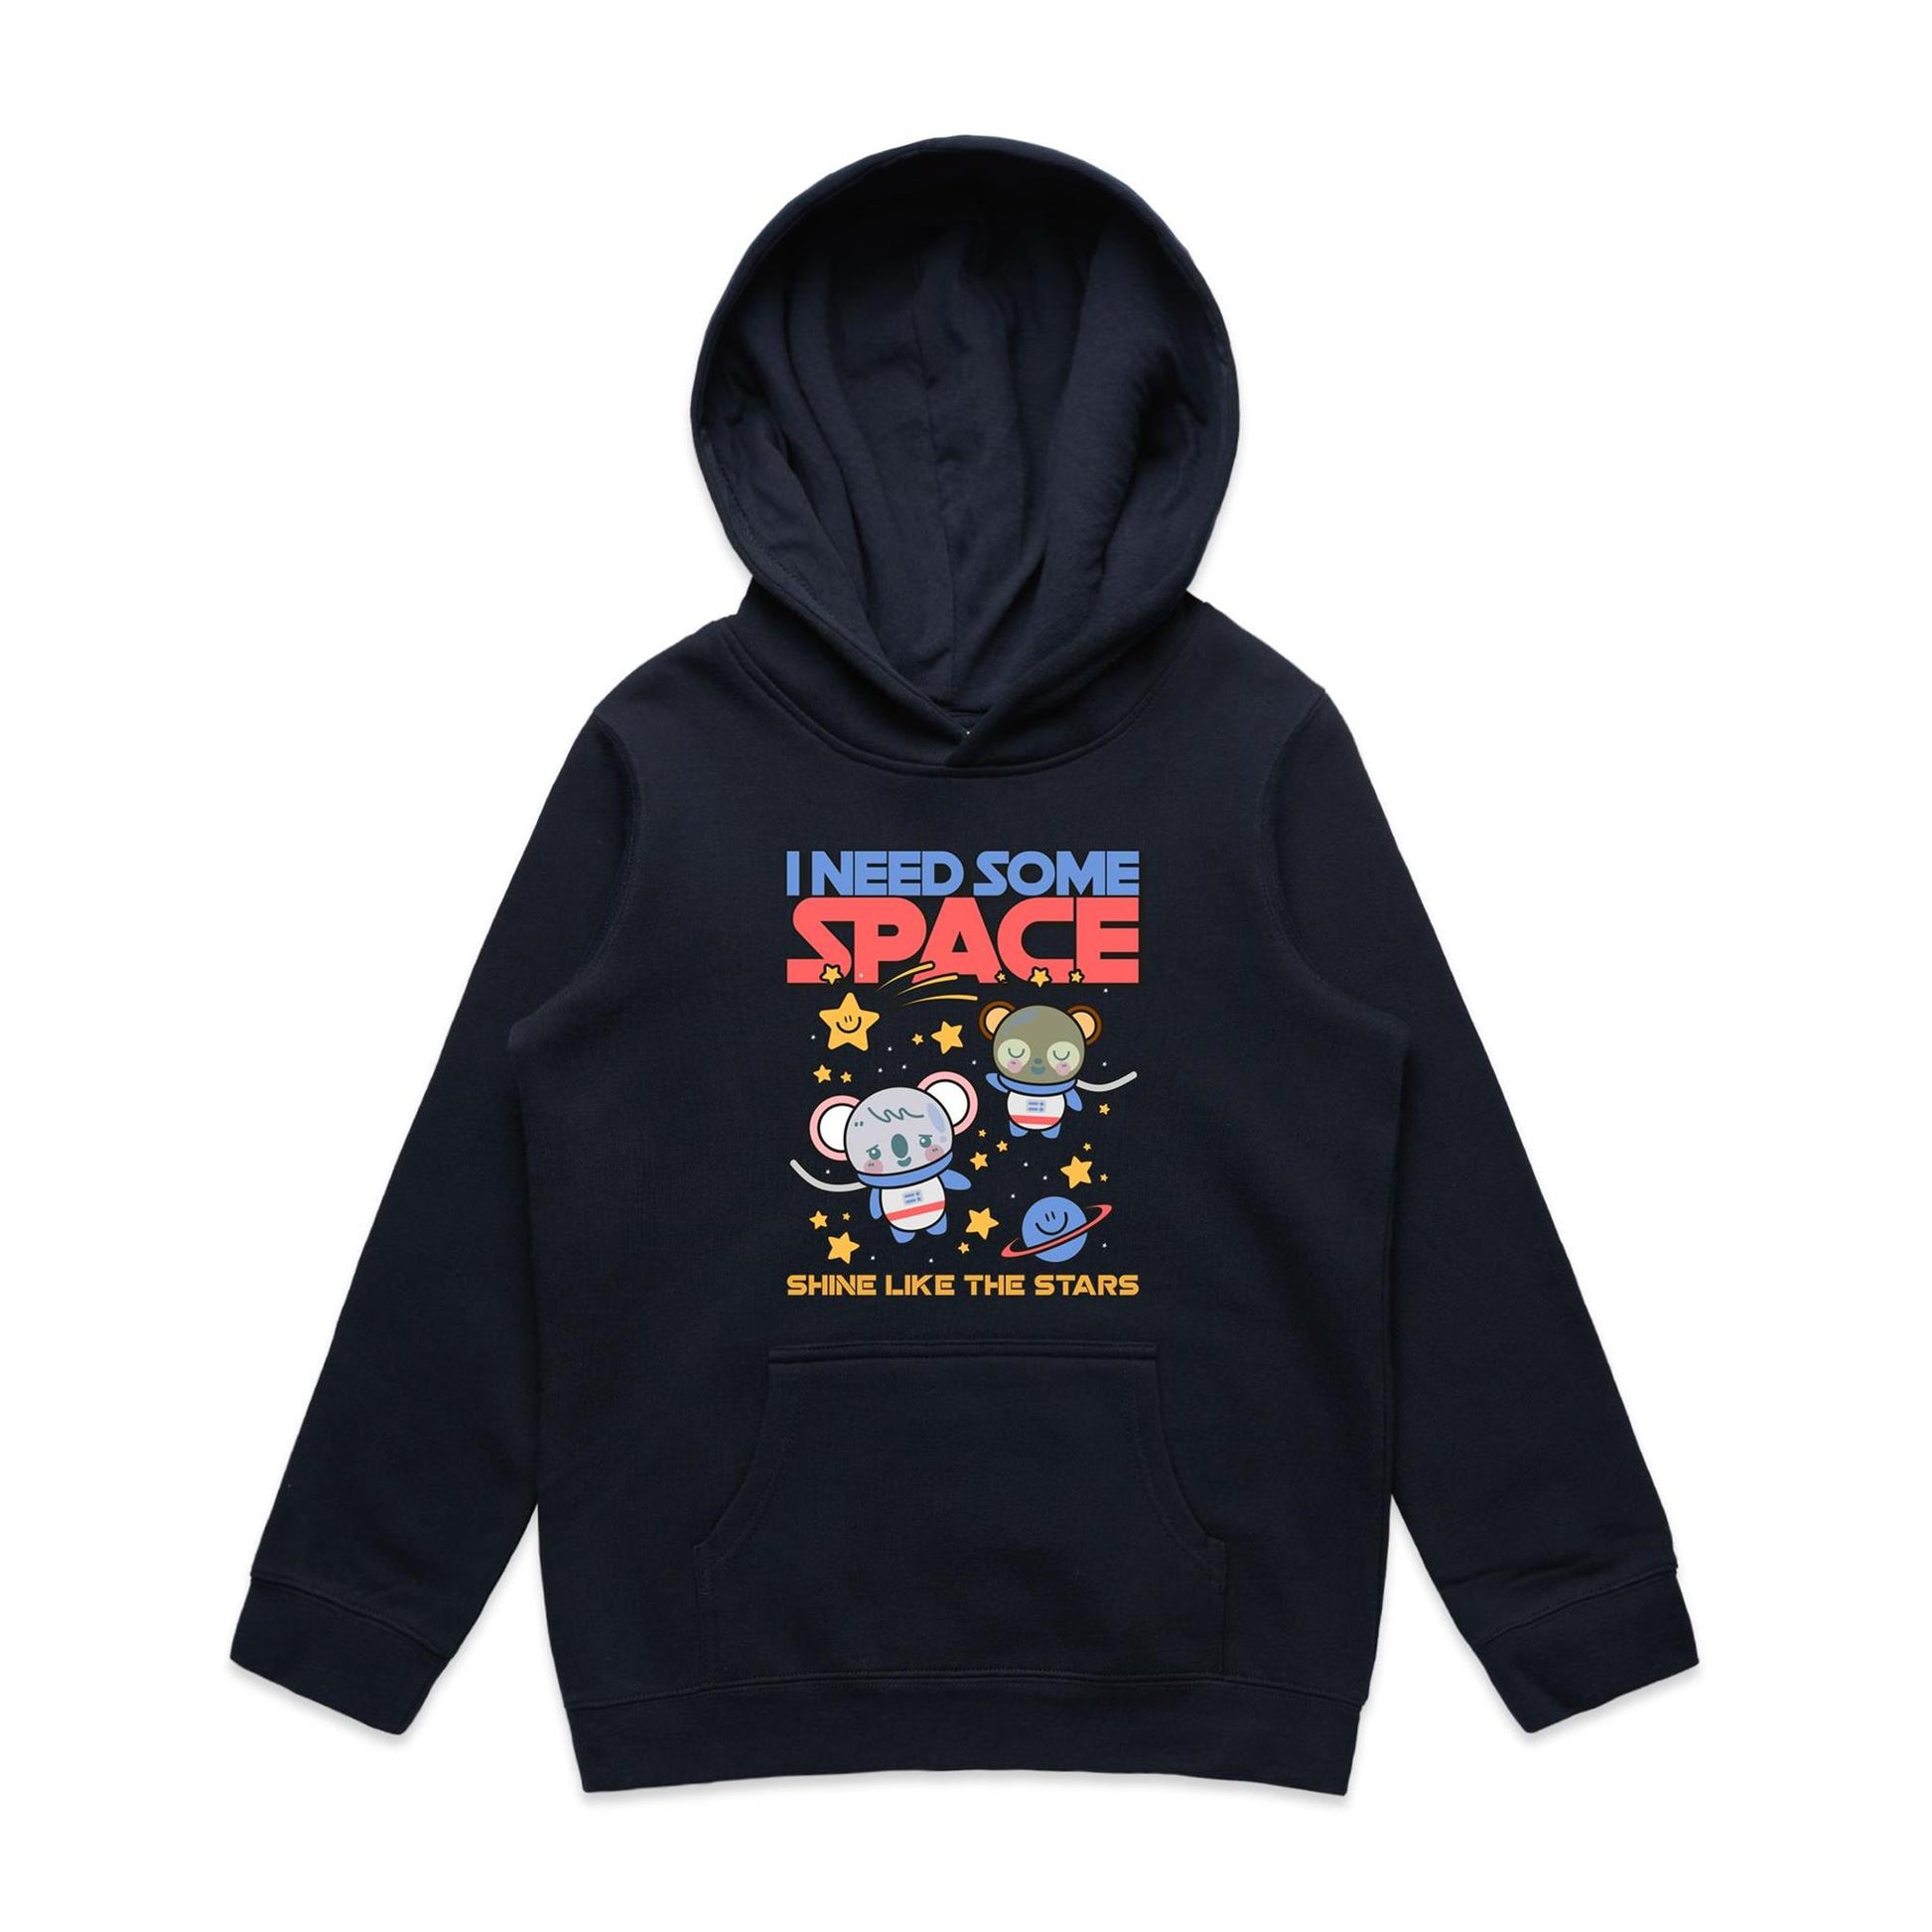 I Need Some Space - Youth Supply Hood Navy Kids Hoodie Space